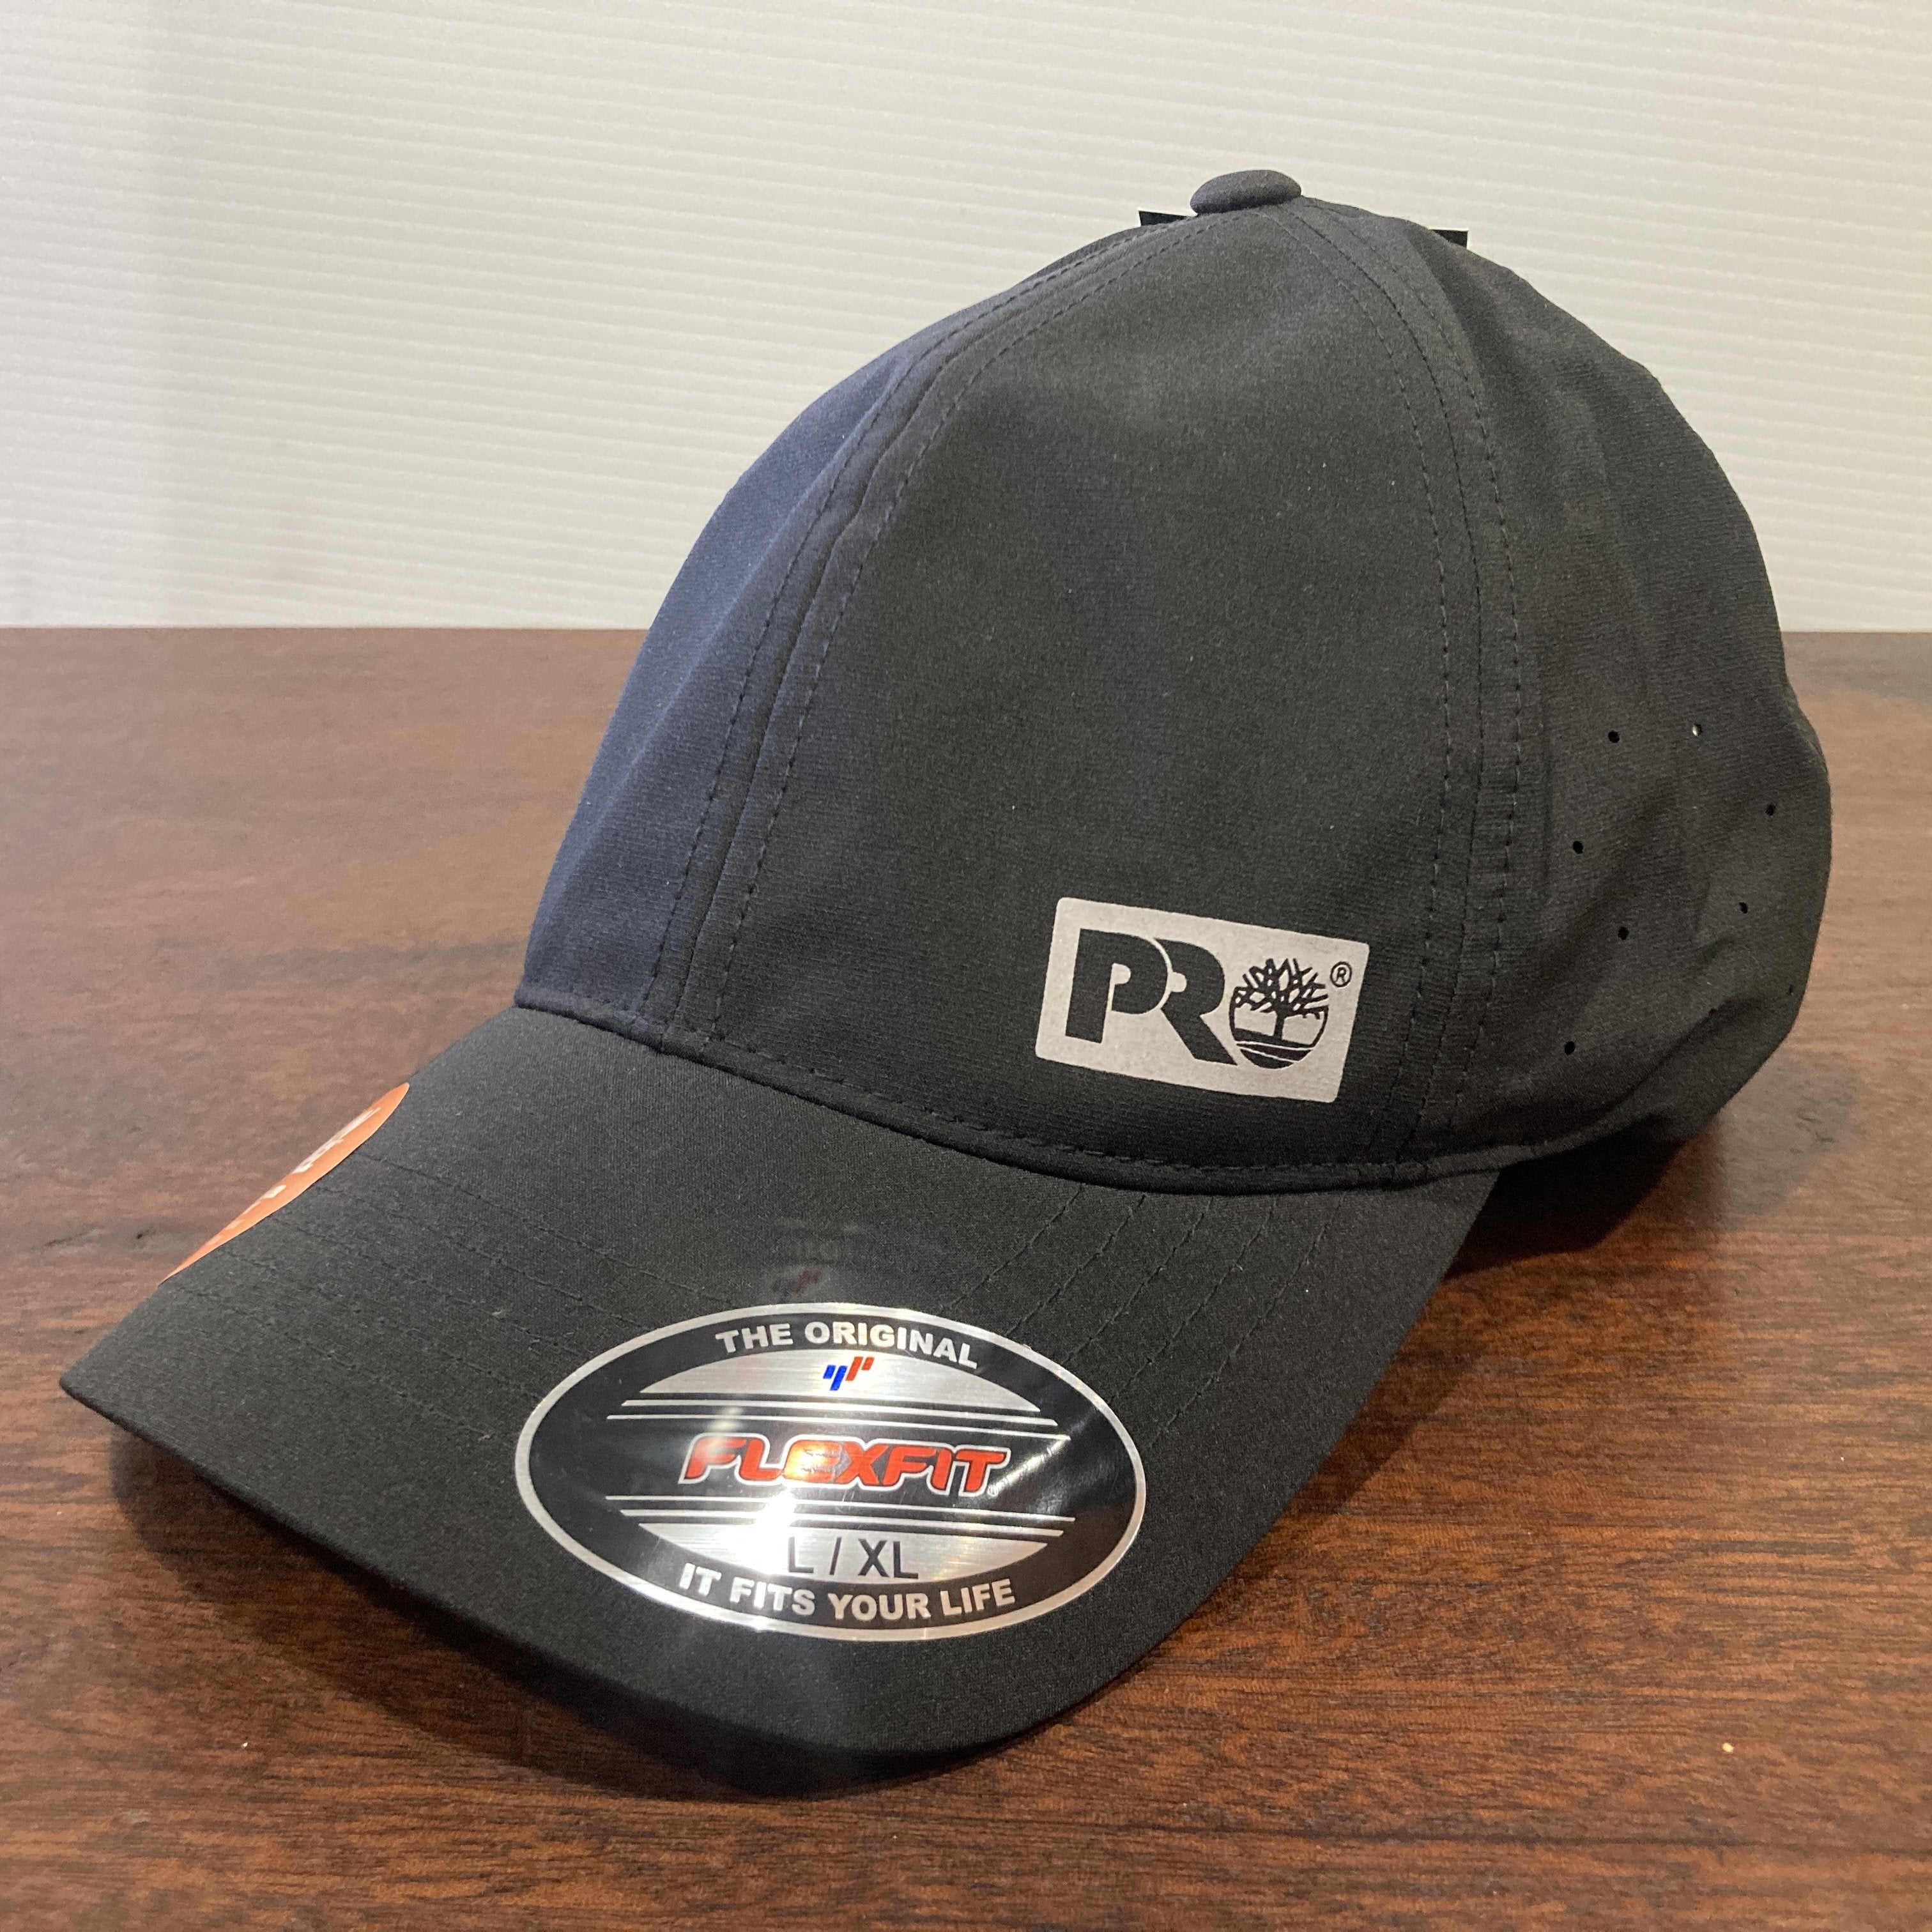 Rose Wind Performance Ltd. North Timberland – Hat Outfitters Pro